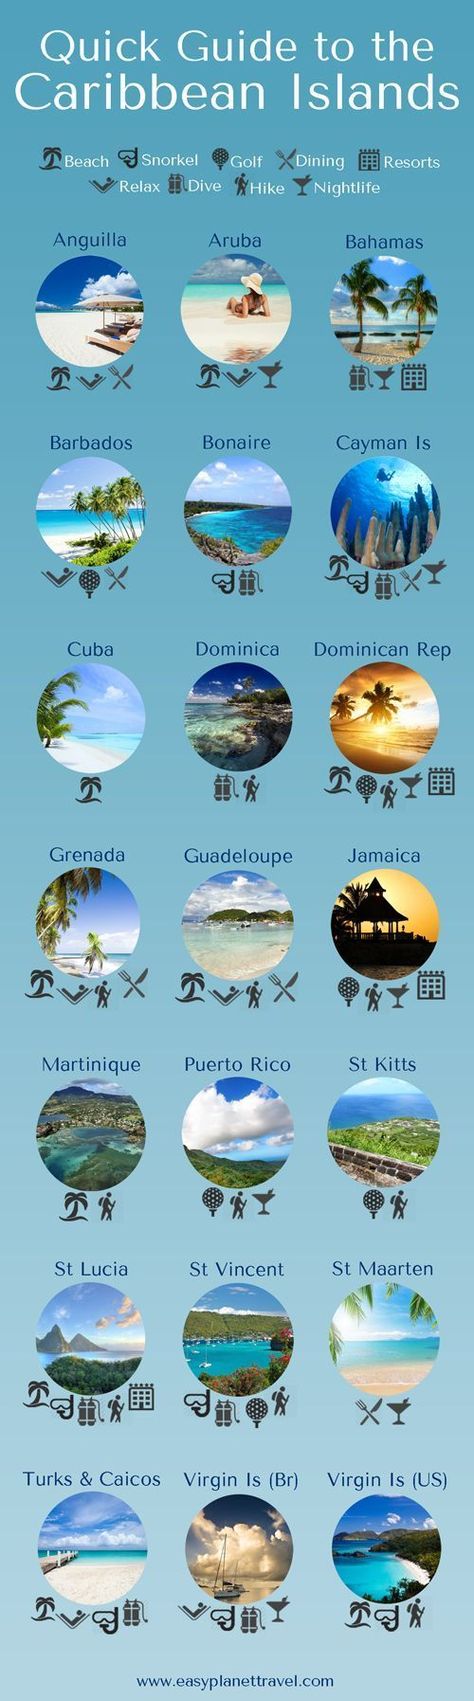 So many islands to choose from! These guides will help make a good decision: http://beachblissliving.com/short-guide-to-caribbean-islands/ Holiday Places, San Andres, Best Caribbean Islands, The Caribbean Islands, Brasov, Caribbean Travel, Alam Semula Jadi, Future Travel, Island Beach